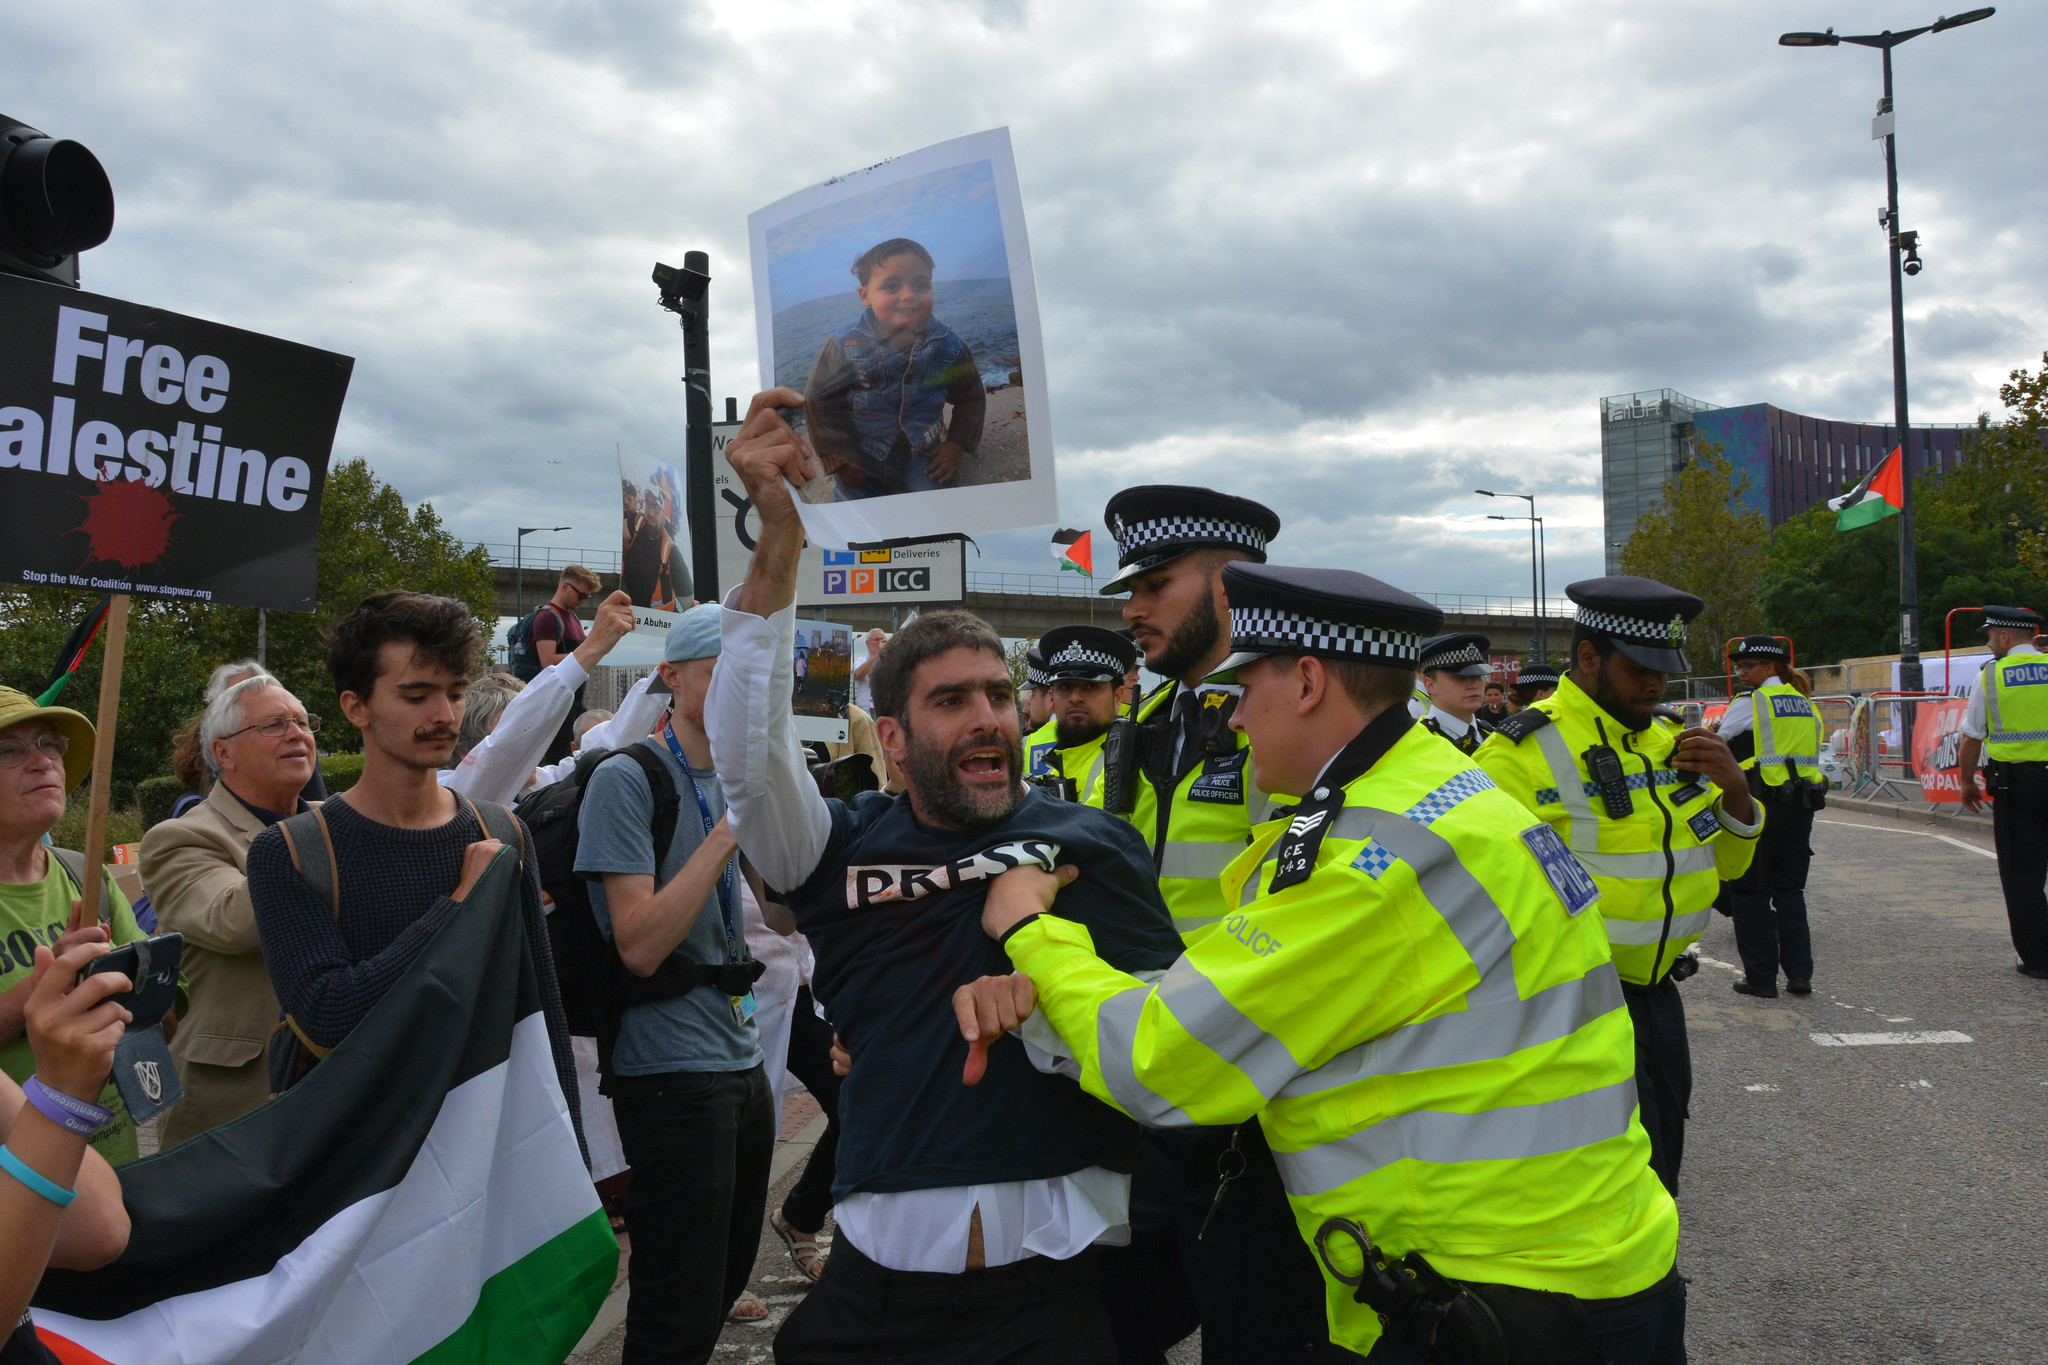 Bearded campaigner holding a picture of a child in front of a crowd carrying Palestine flags. They are shouting. 2 police officers are holding the campaigner with the picture back from a road going into Excel in London.